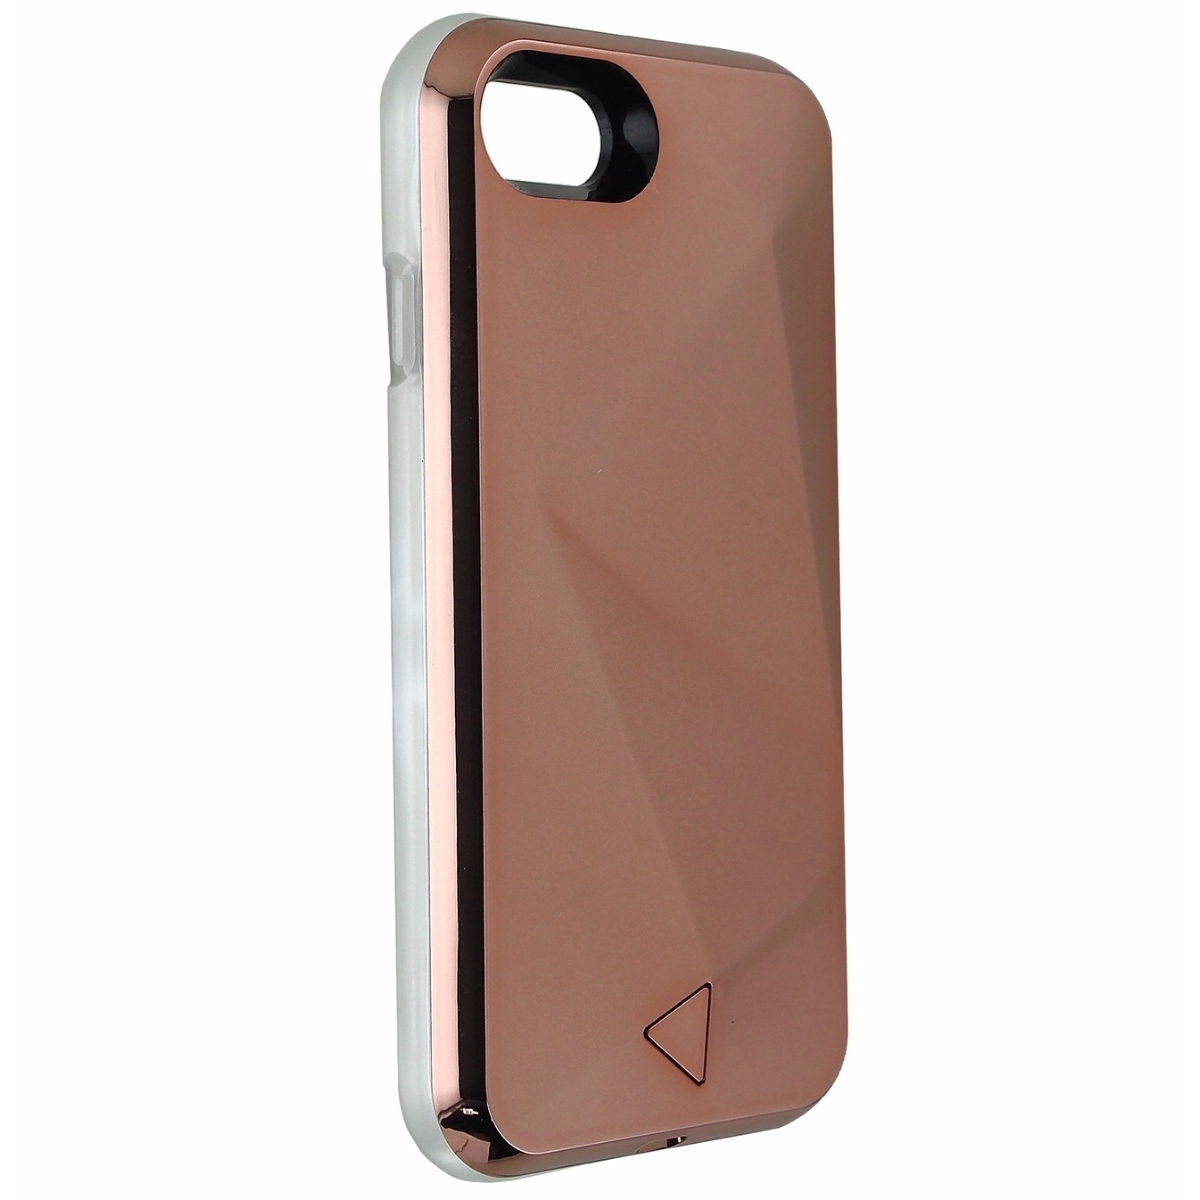 Rebecca Minkoff Glow Selfie Case Cover For Apple IPhone 7 - Rose Gold / Frost